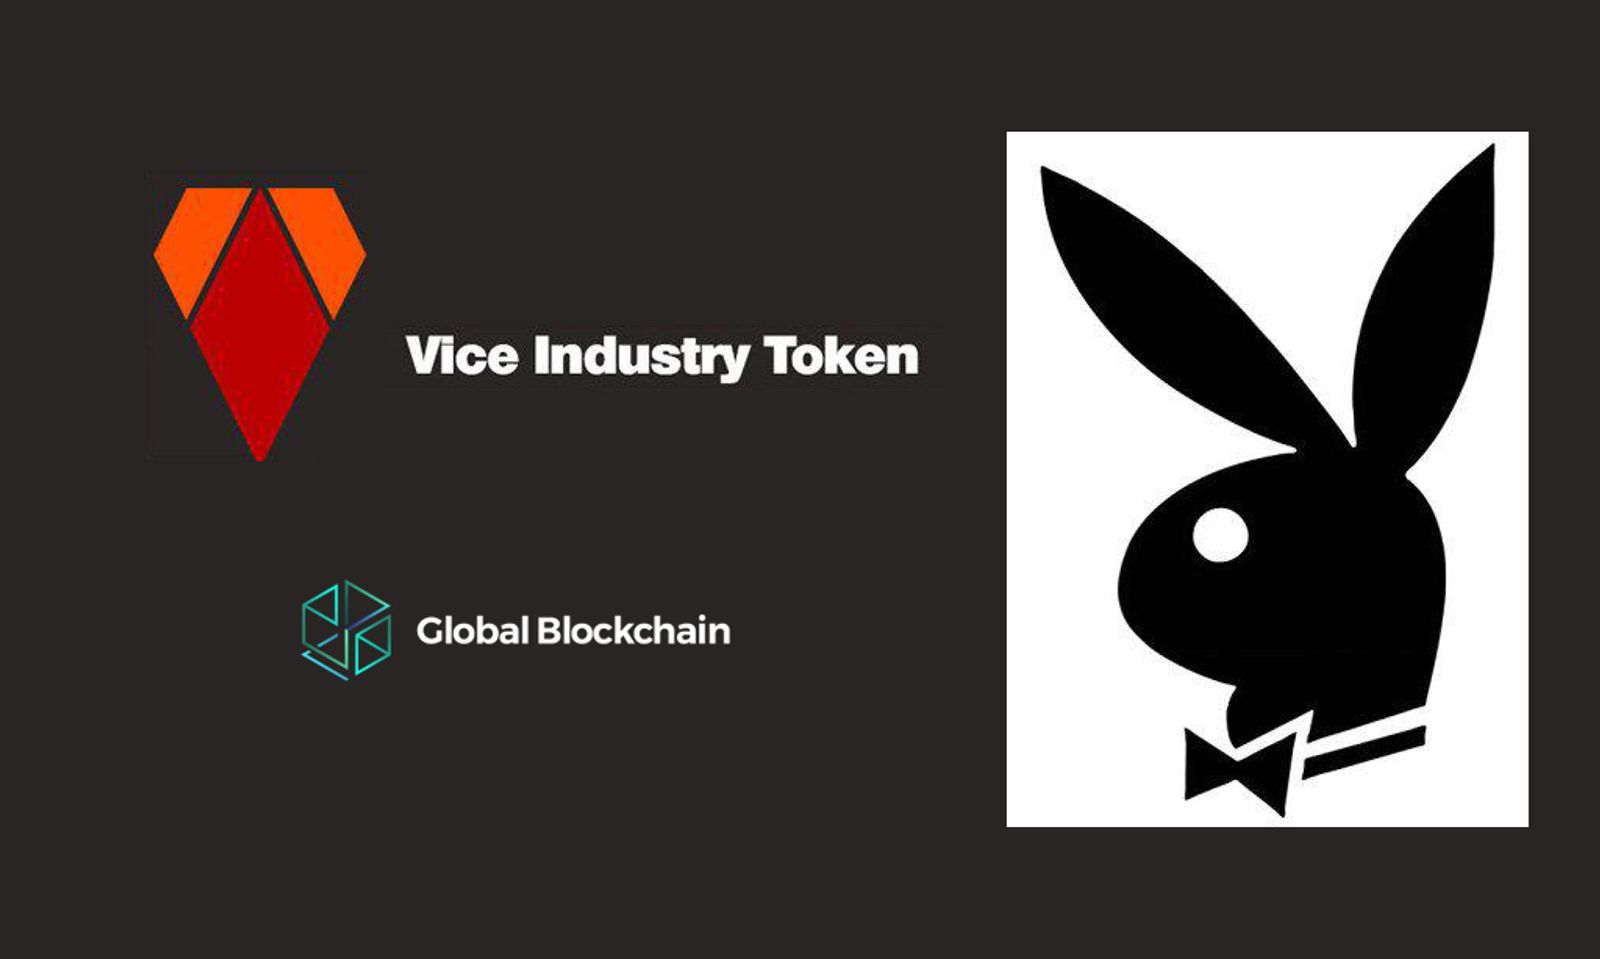 Vice Industry Token Vows Action in Fallout of Playboy/GBT Suit